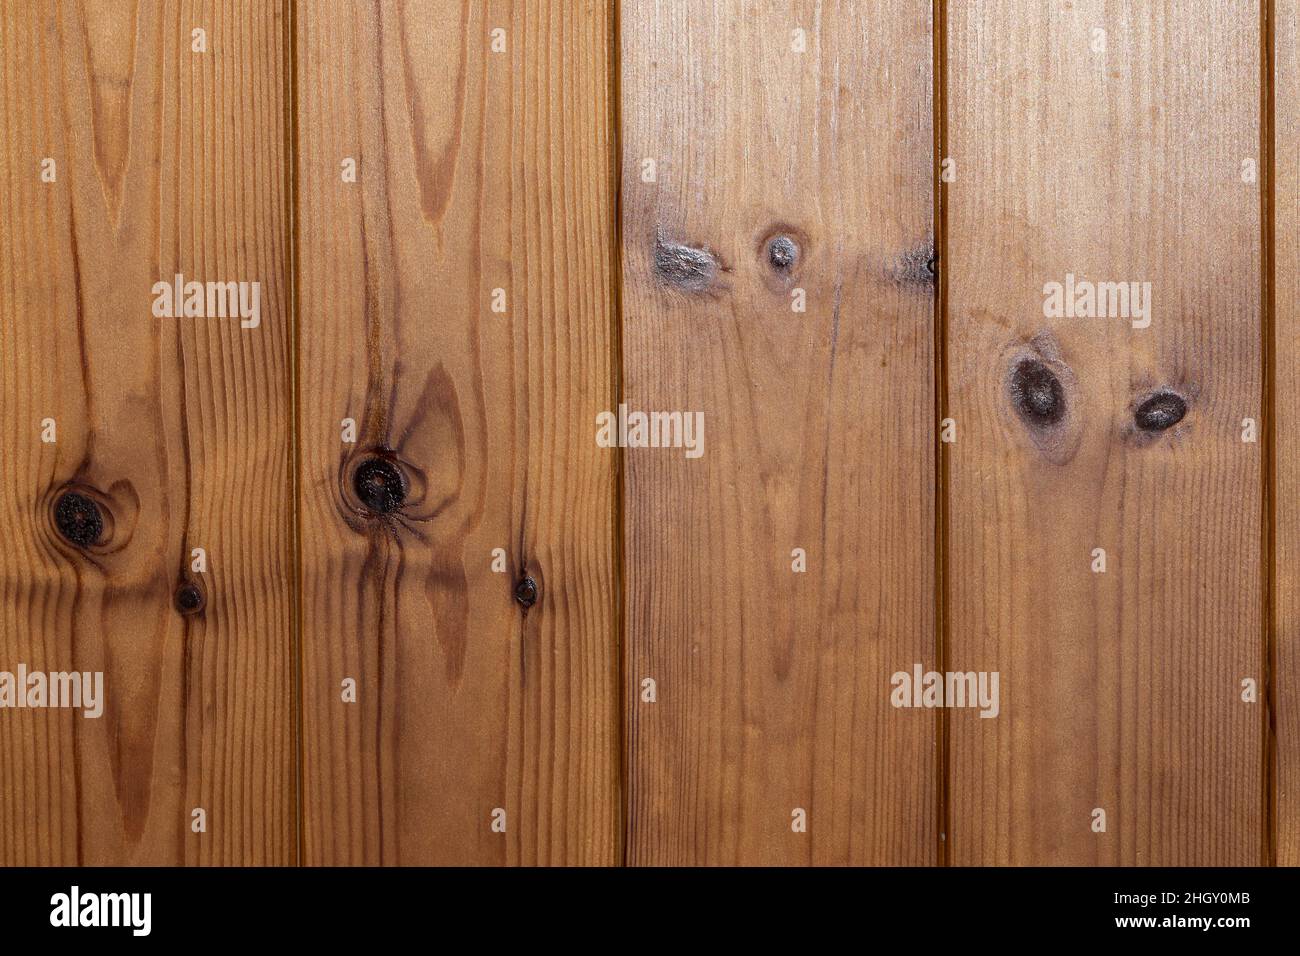 background of wooden boards Stock Photo